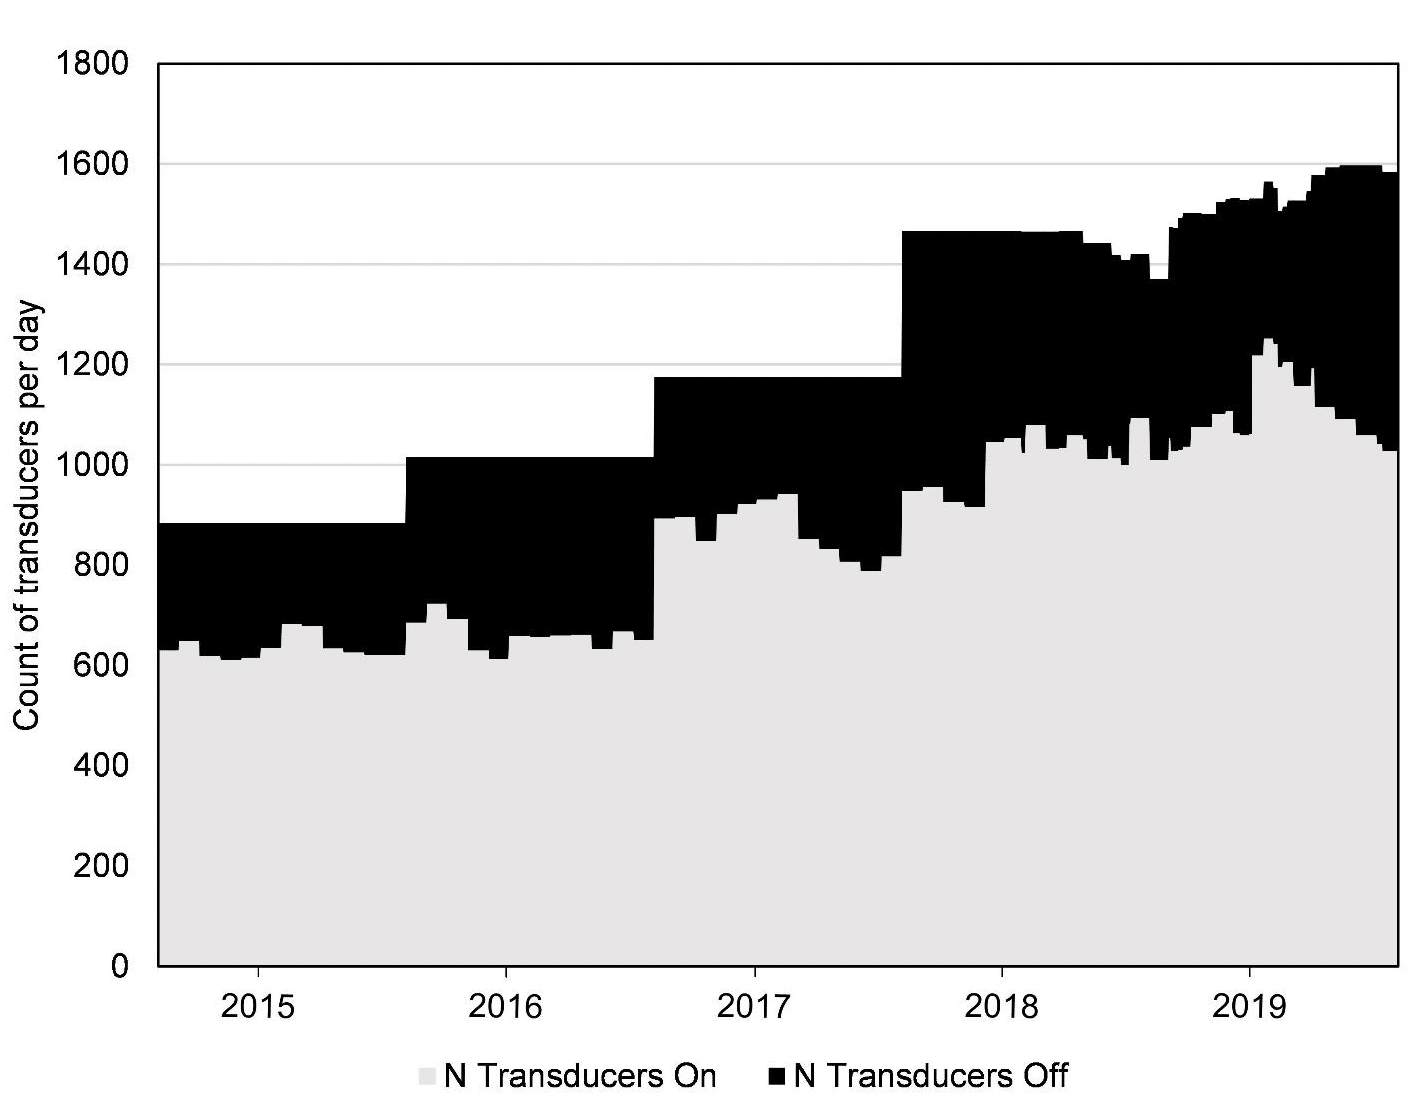 A chart showing the number of ADD transducers at finfish farm sites over each day during 2014-2019. The total number of transducers has increased from approximately 900 to 1600, while the proportion of those on and off has remained consistent.